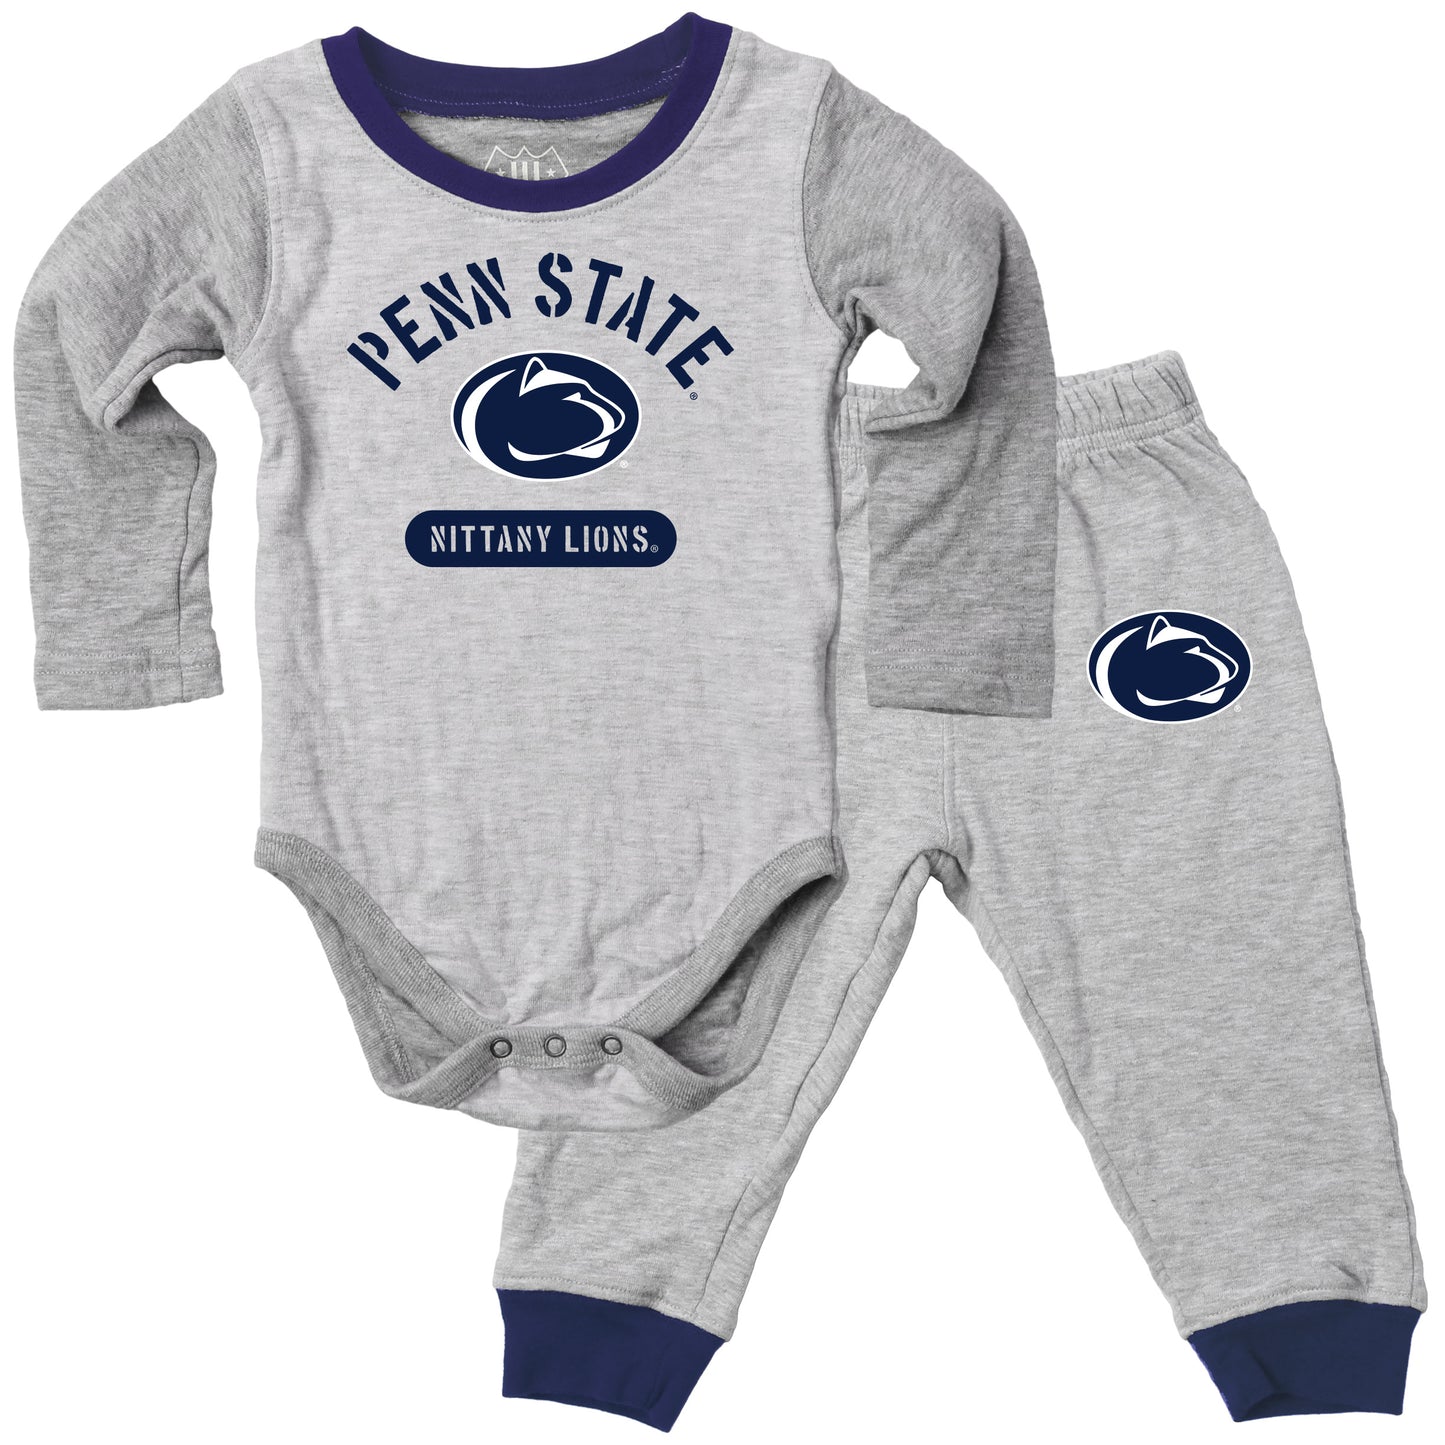 Penn State Nittany Lions Wes and Willy Baby College Jie Jie Long Sleeve Bodysuit and Pant Set